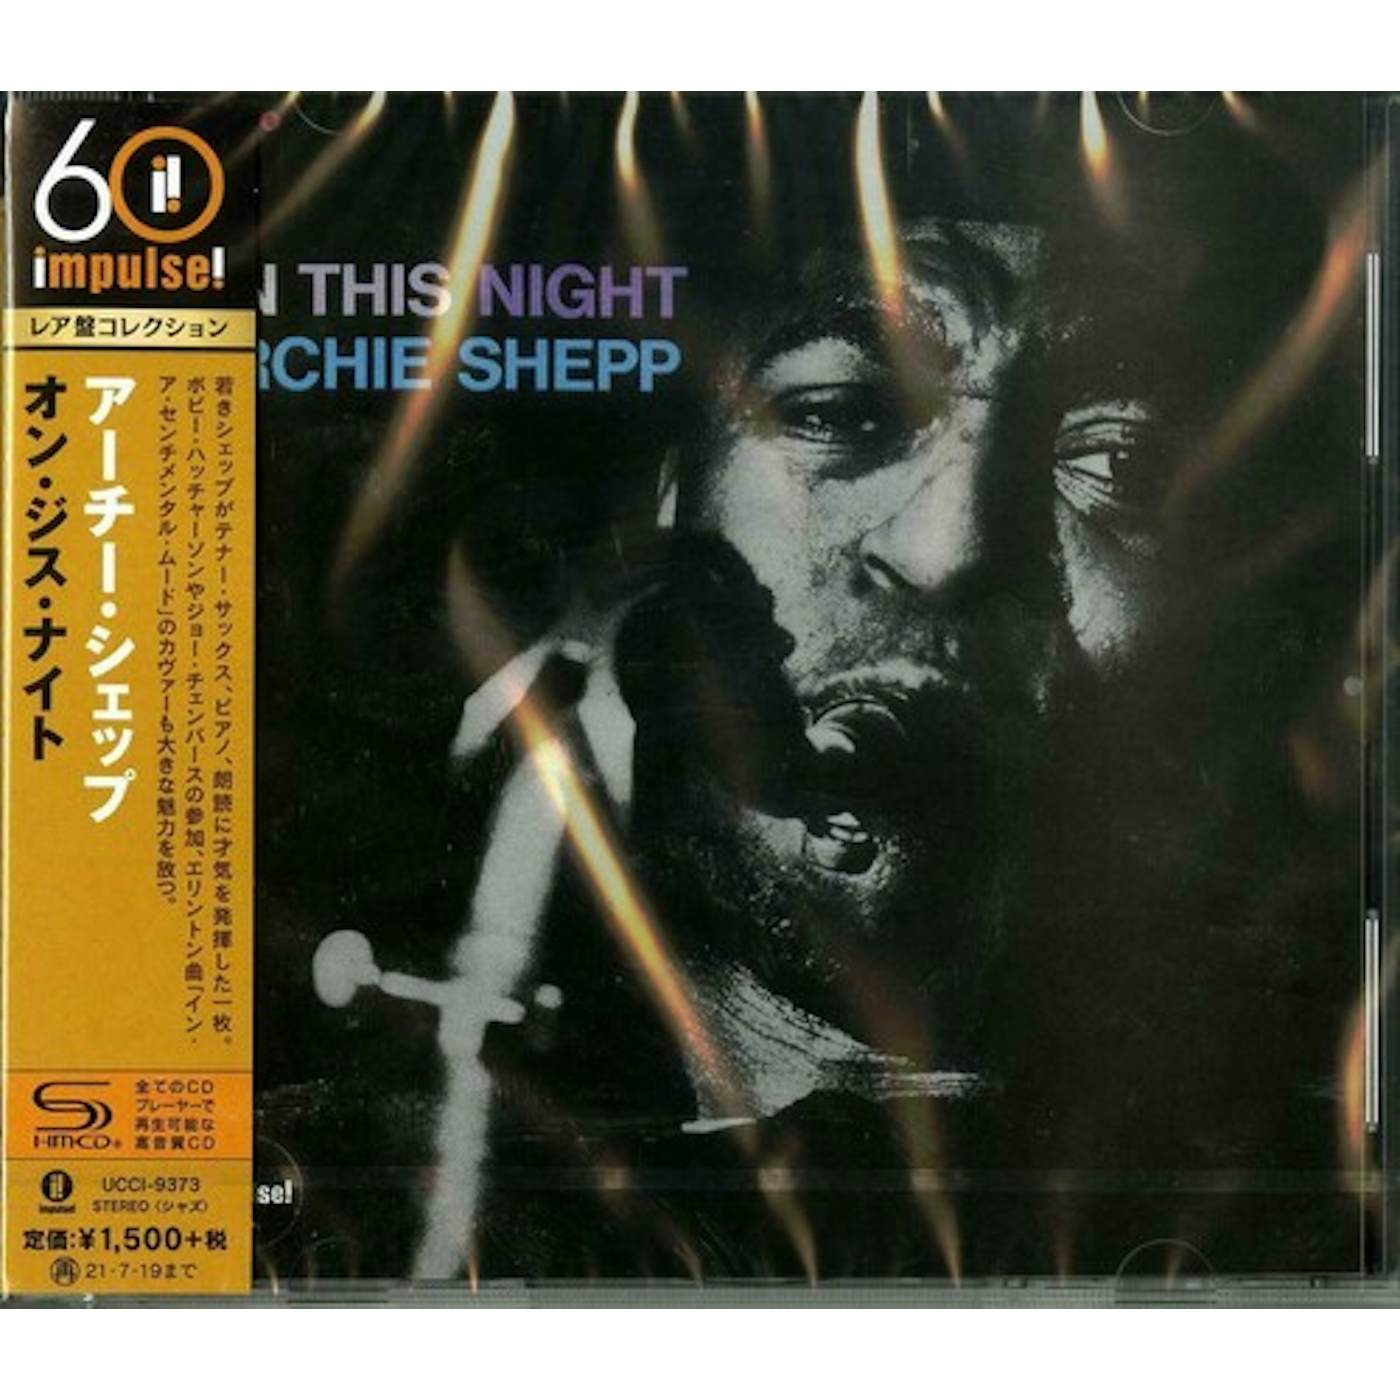 Archie Shepp ON THIS NIGHT CD